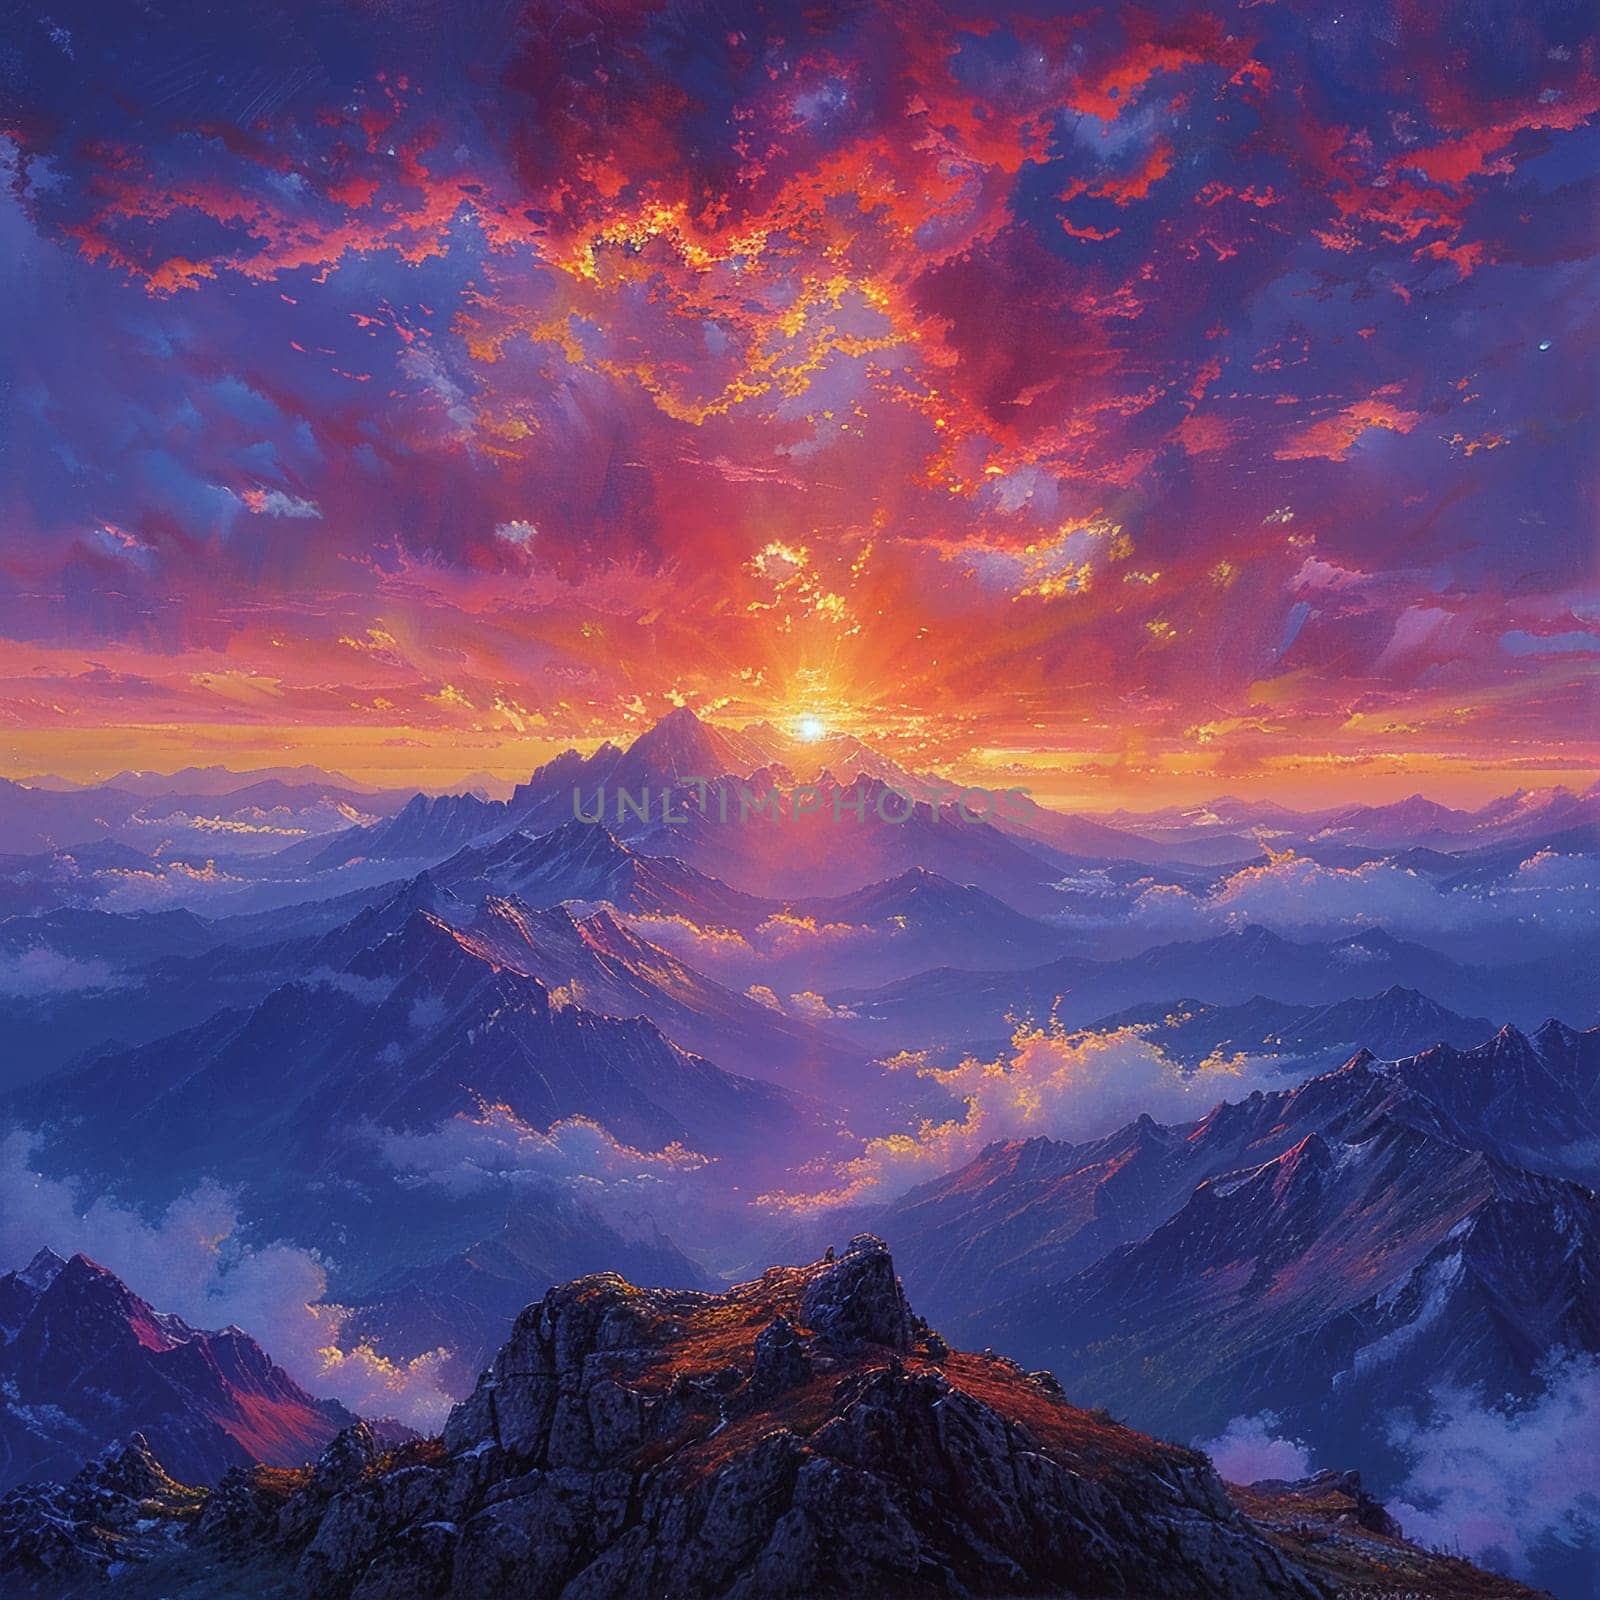 Mountain peak sunset painted with an emphasis on dramatic lighting and expansive views in a romantic style.